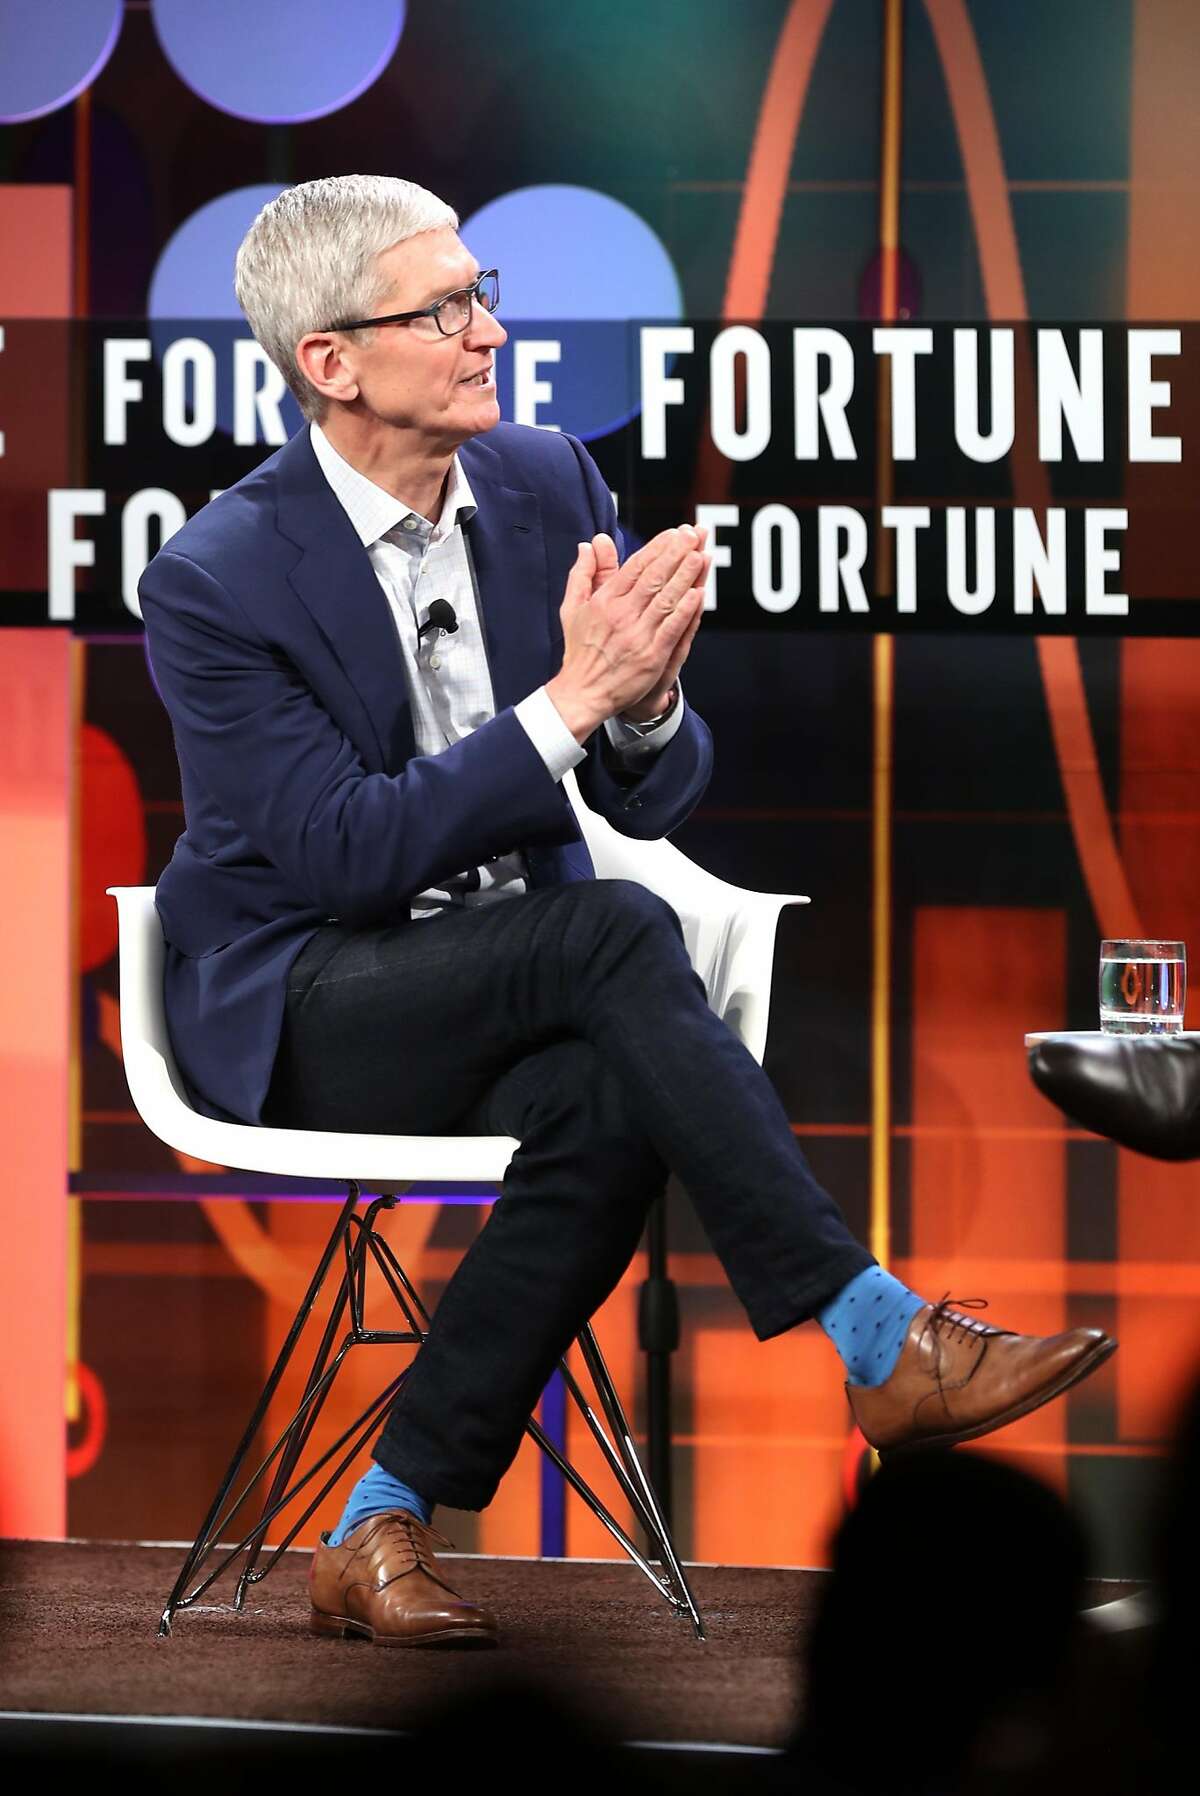 Apple CEO Tim Cook takes part in The Fortune CEO Initiative2018 Annual Meeting at St. Regis in San Francisco, Calif. on Monday, June 25, 2018.